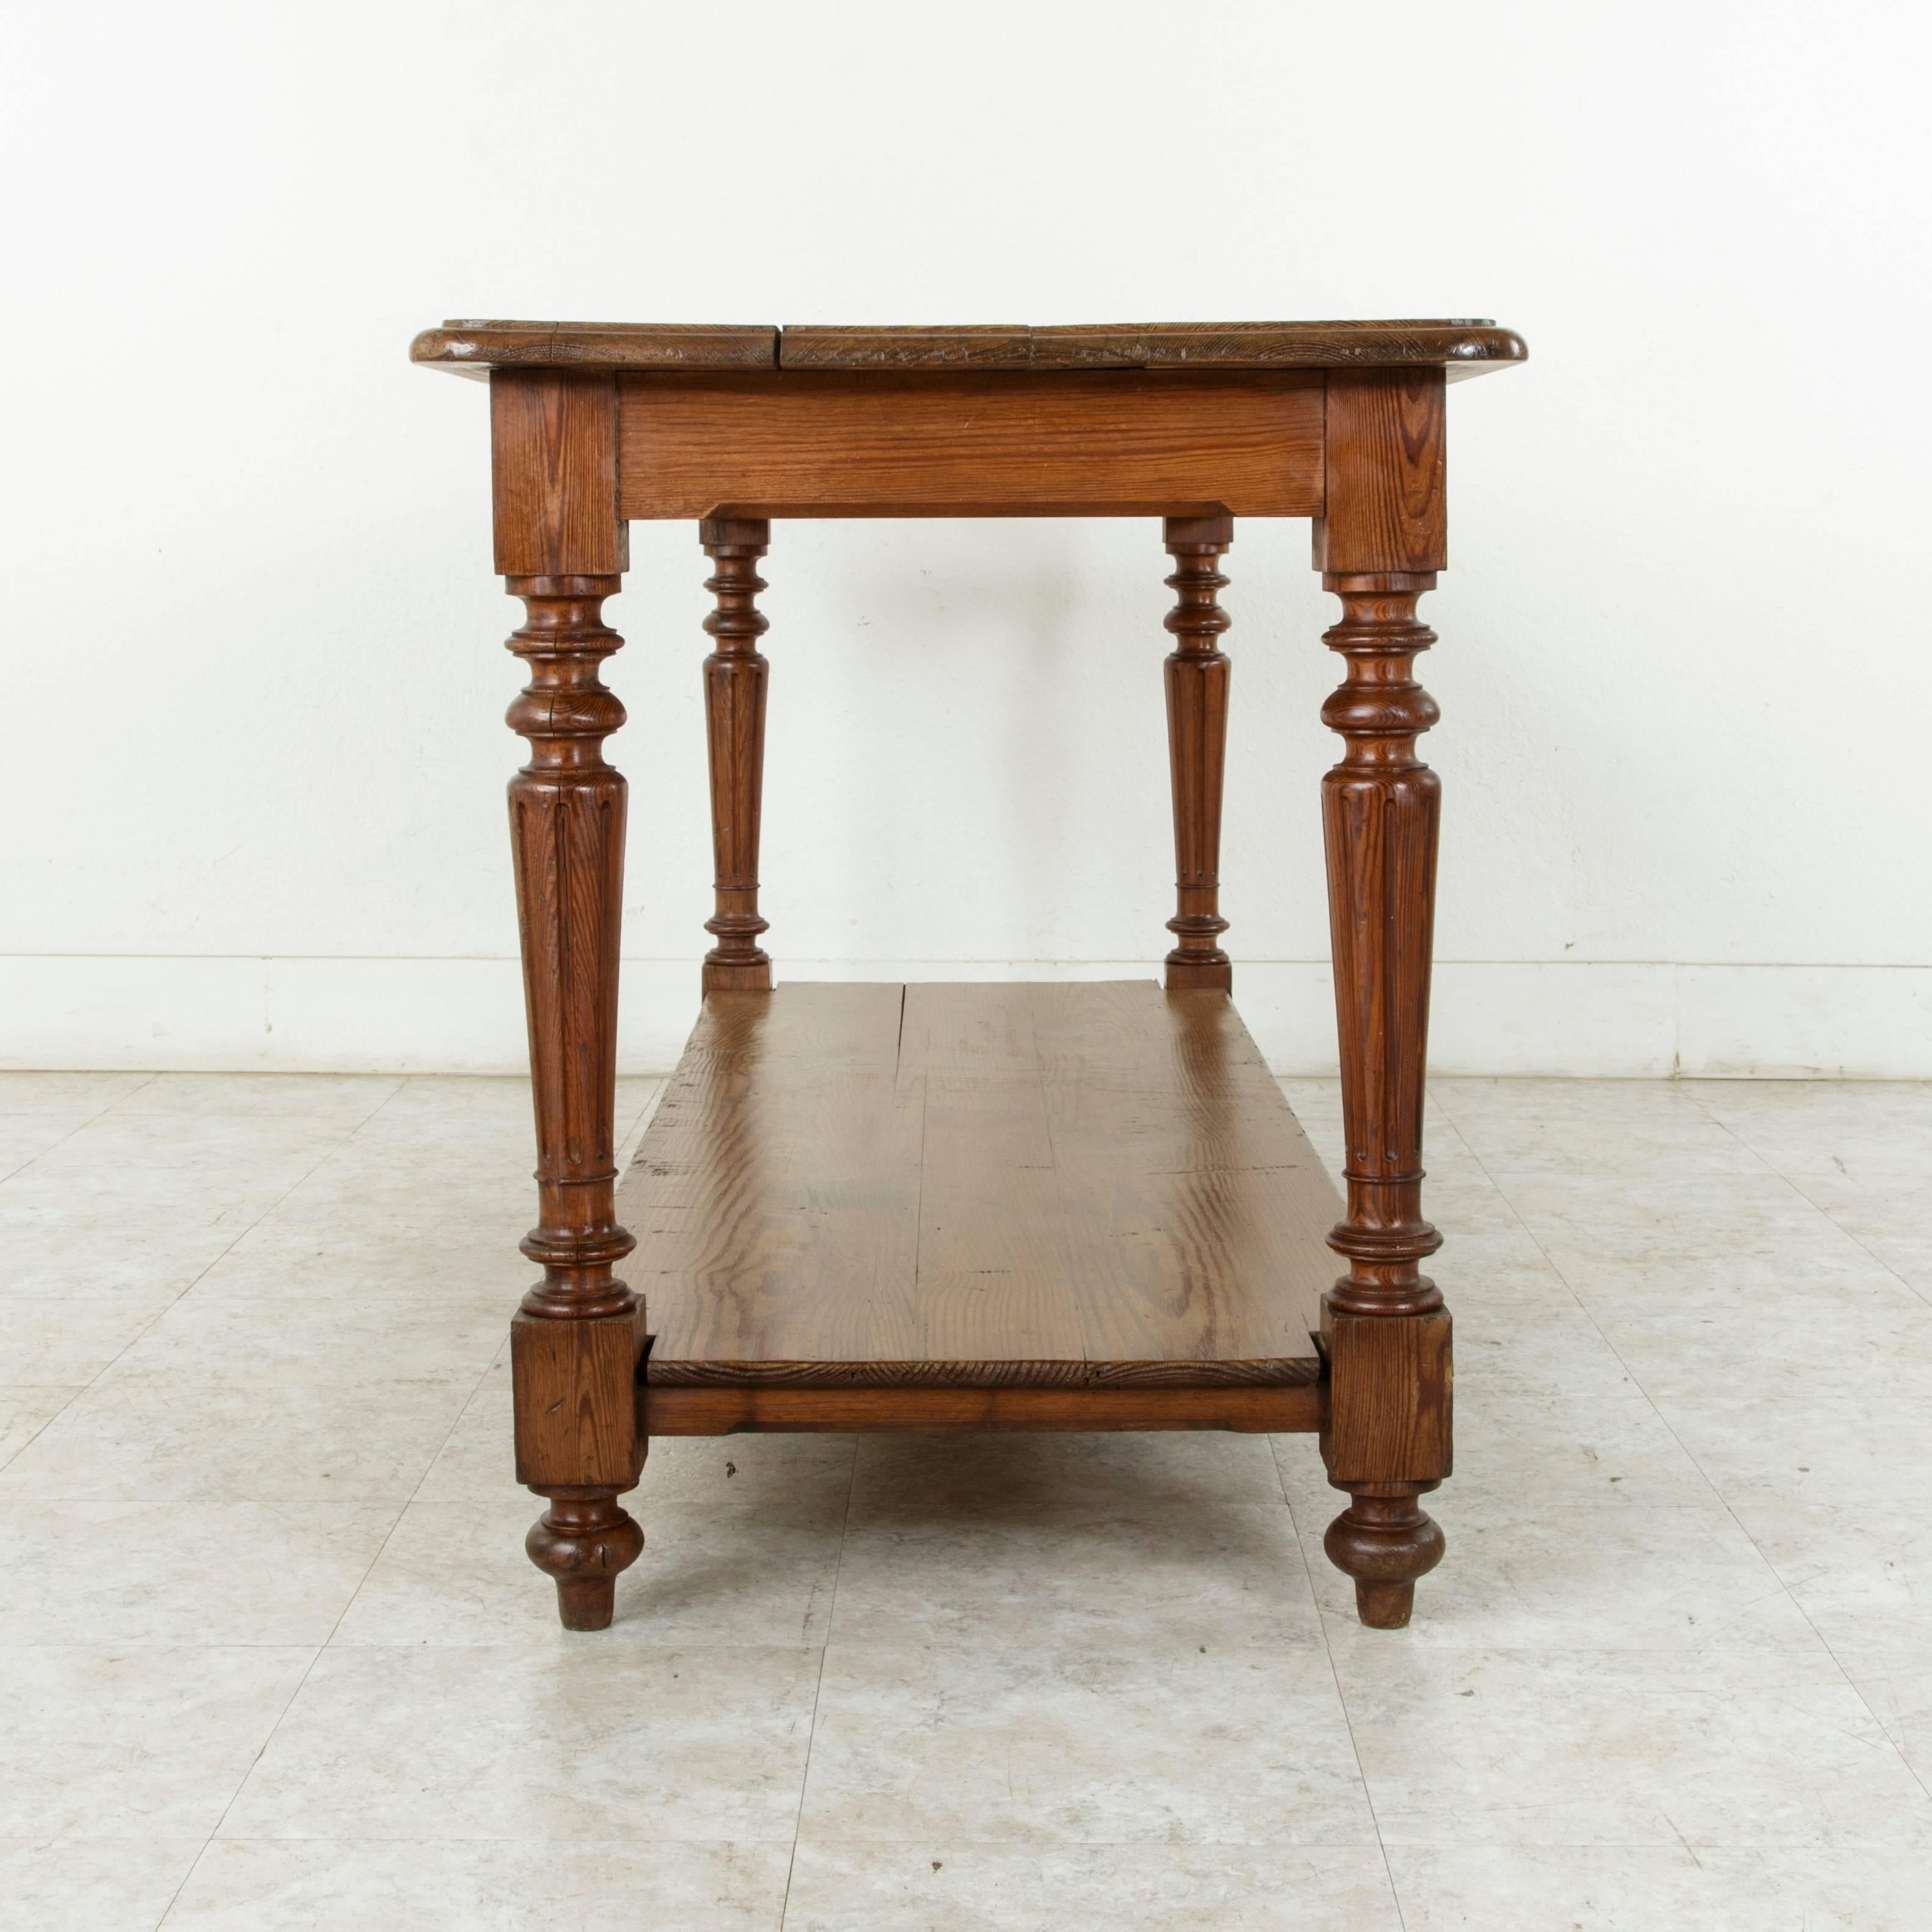 French Pitch Pine Draper's Table, Work Table, or Kitchen Island, circa 1900 2